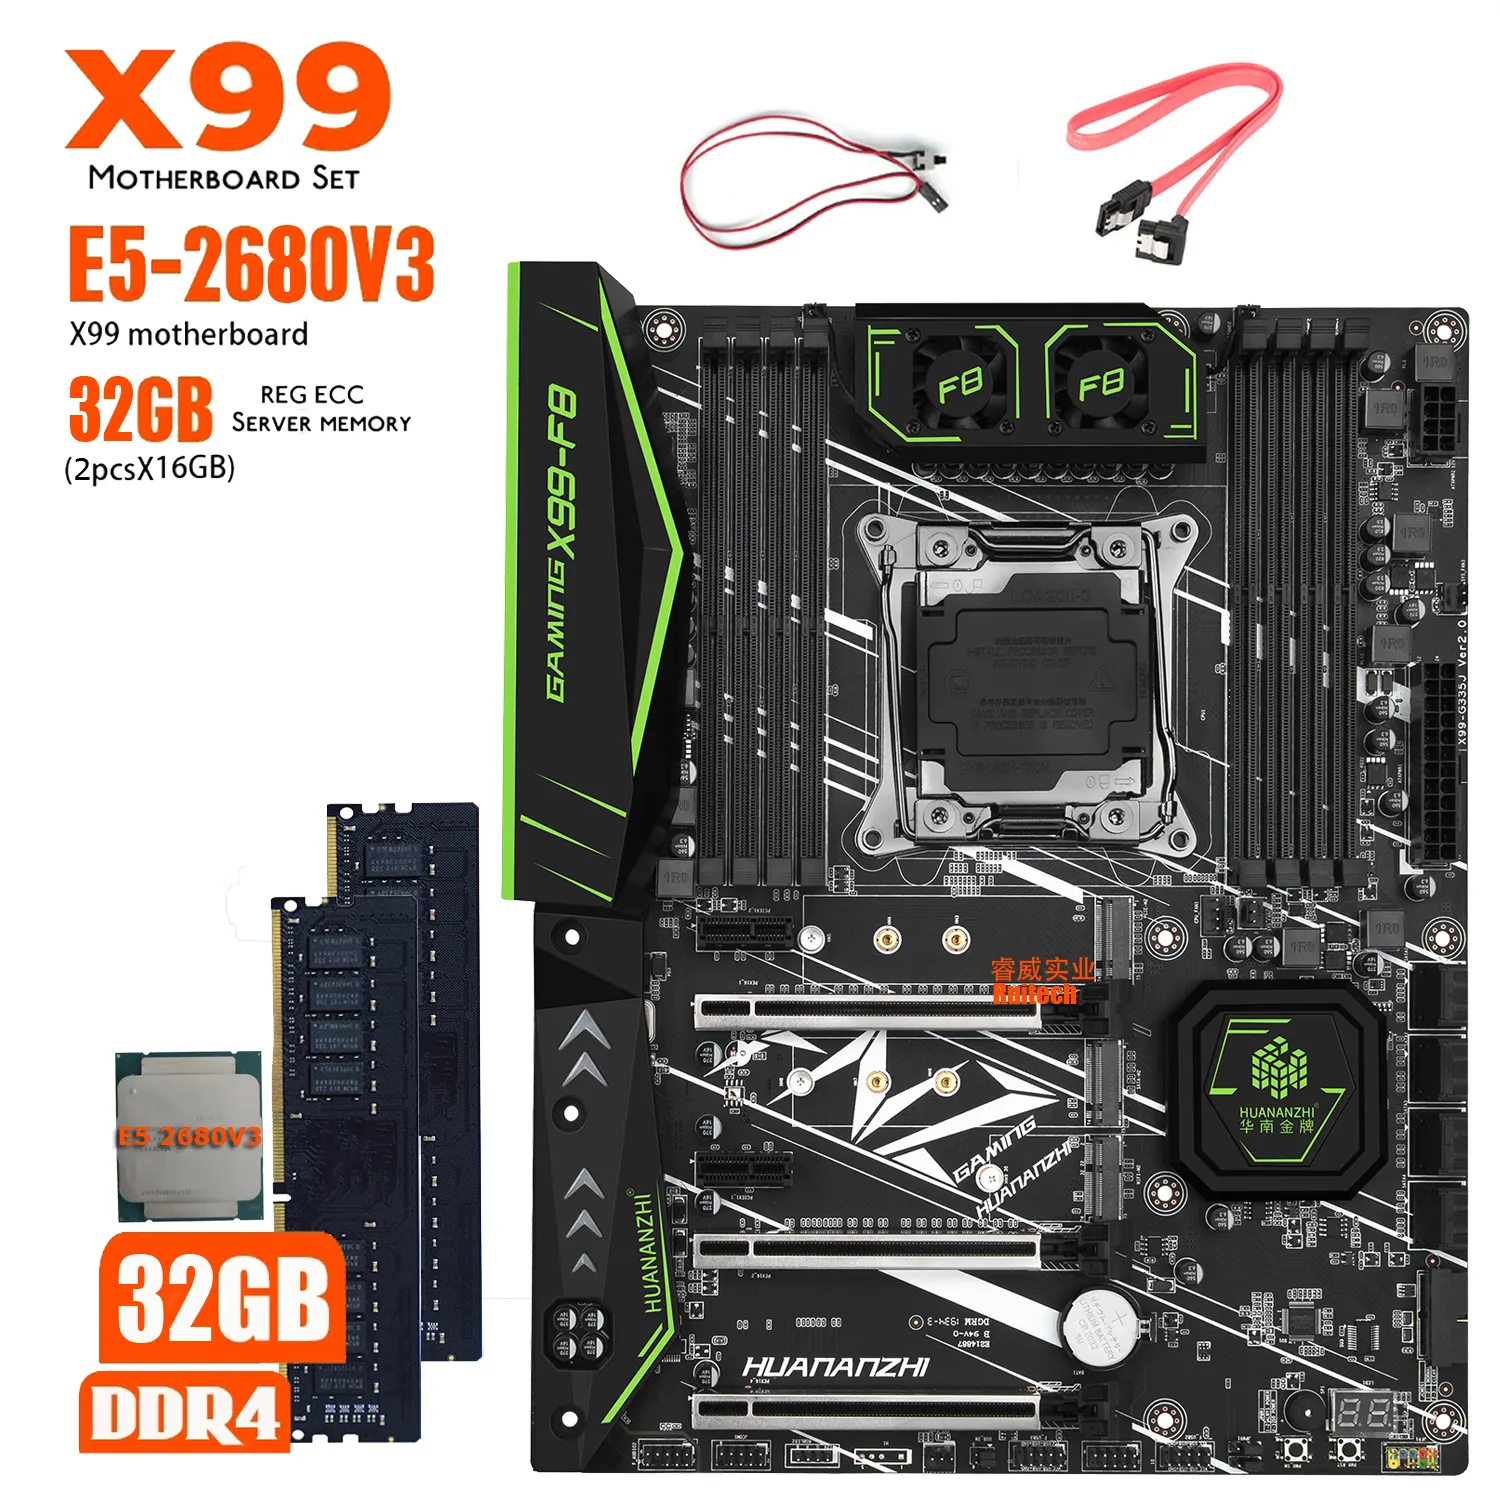 HUANANZHI X99 F8 X99 Motherboard with Intel XEON E5 2680 V3 with 2*16GB = 32GB DDR4 2133MHz REG ECC Memory Combo Kit Set NVME